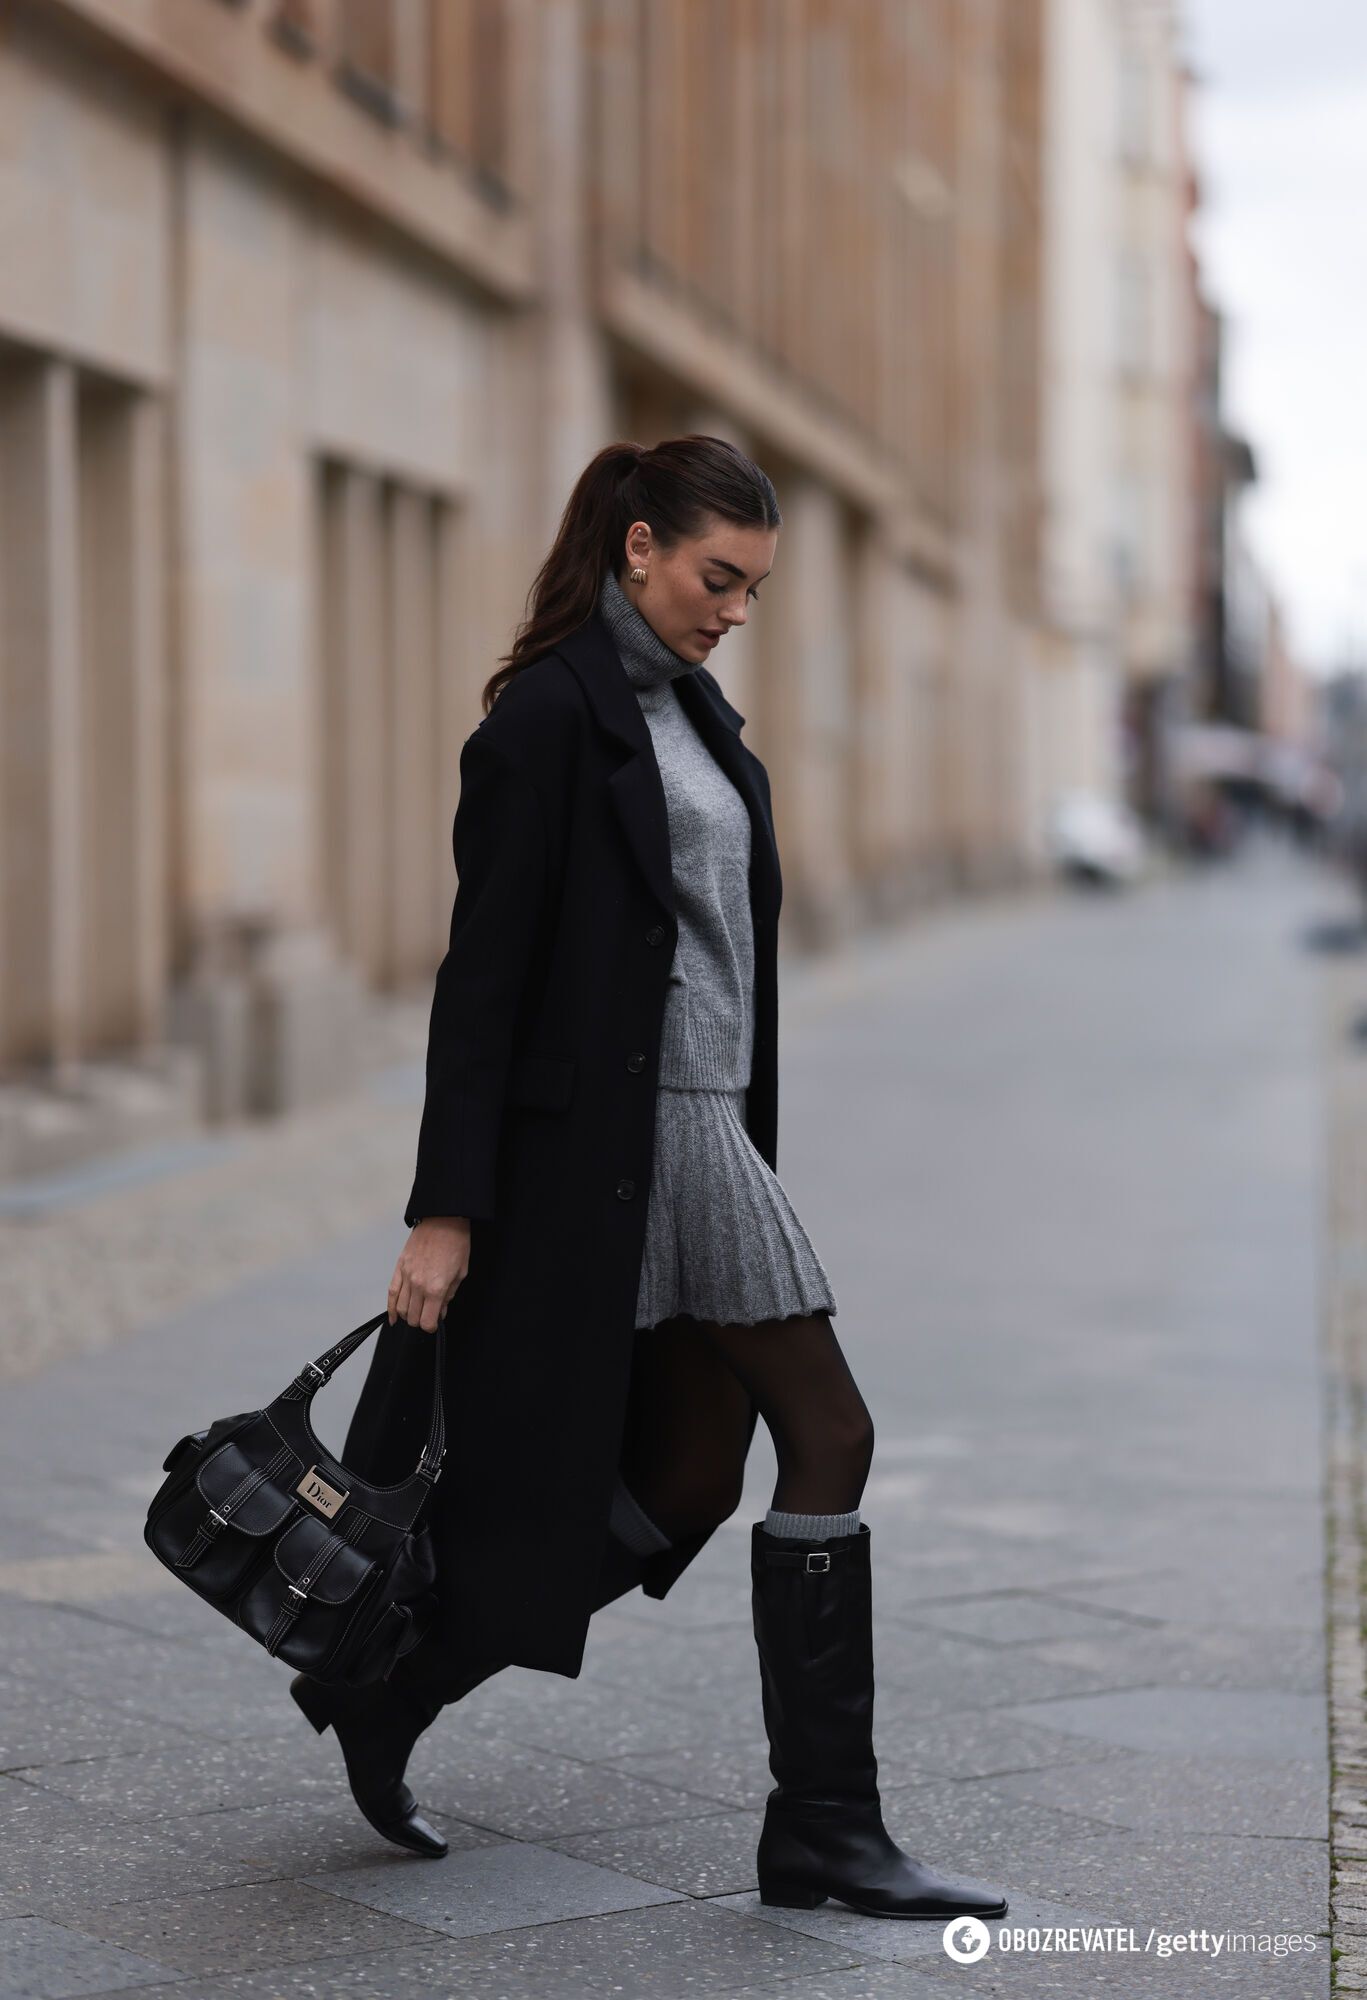 You won't be cold: 5 stylish ideas on how to wear winter shoes with skirts and dresses